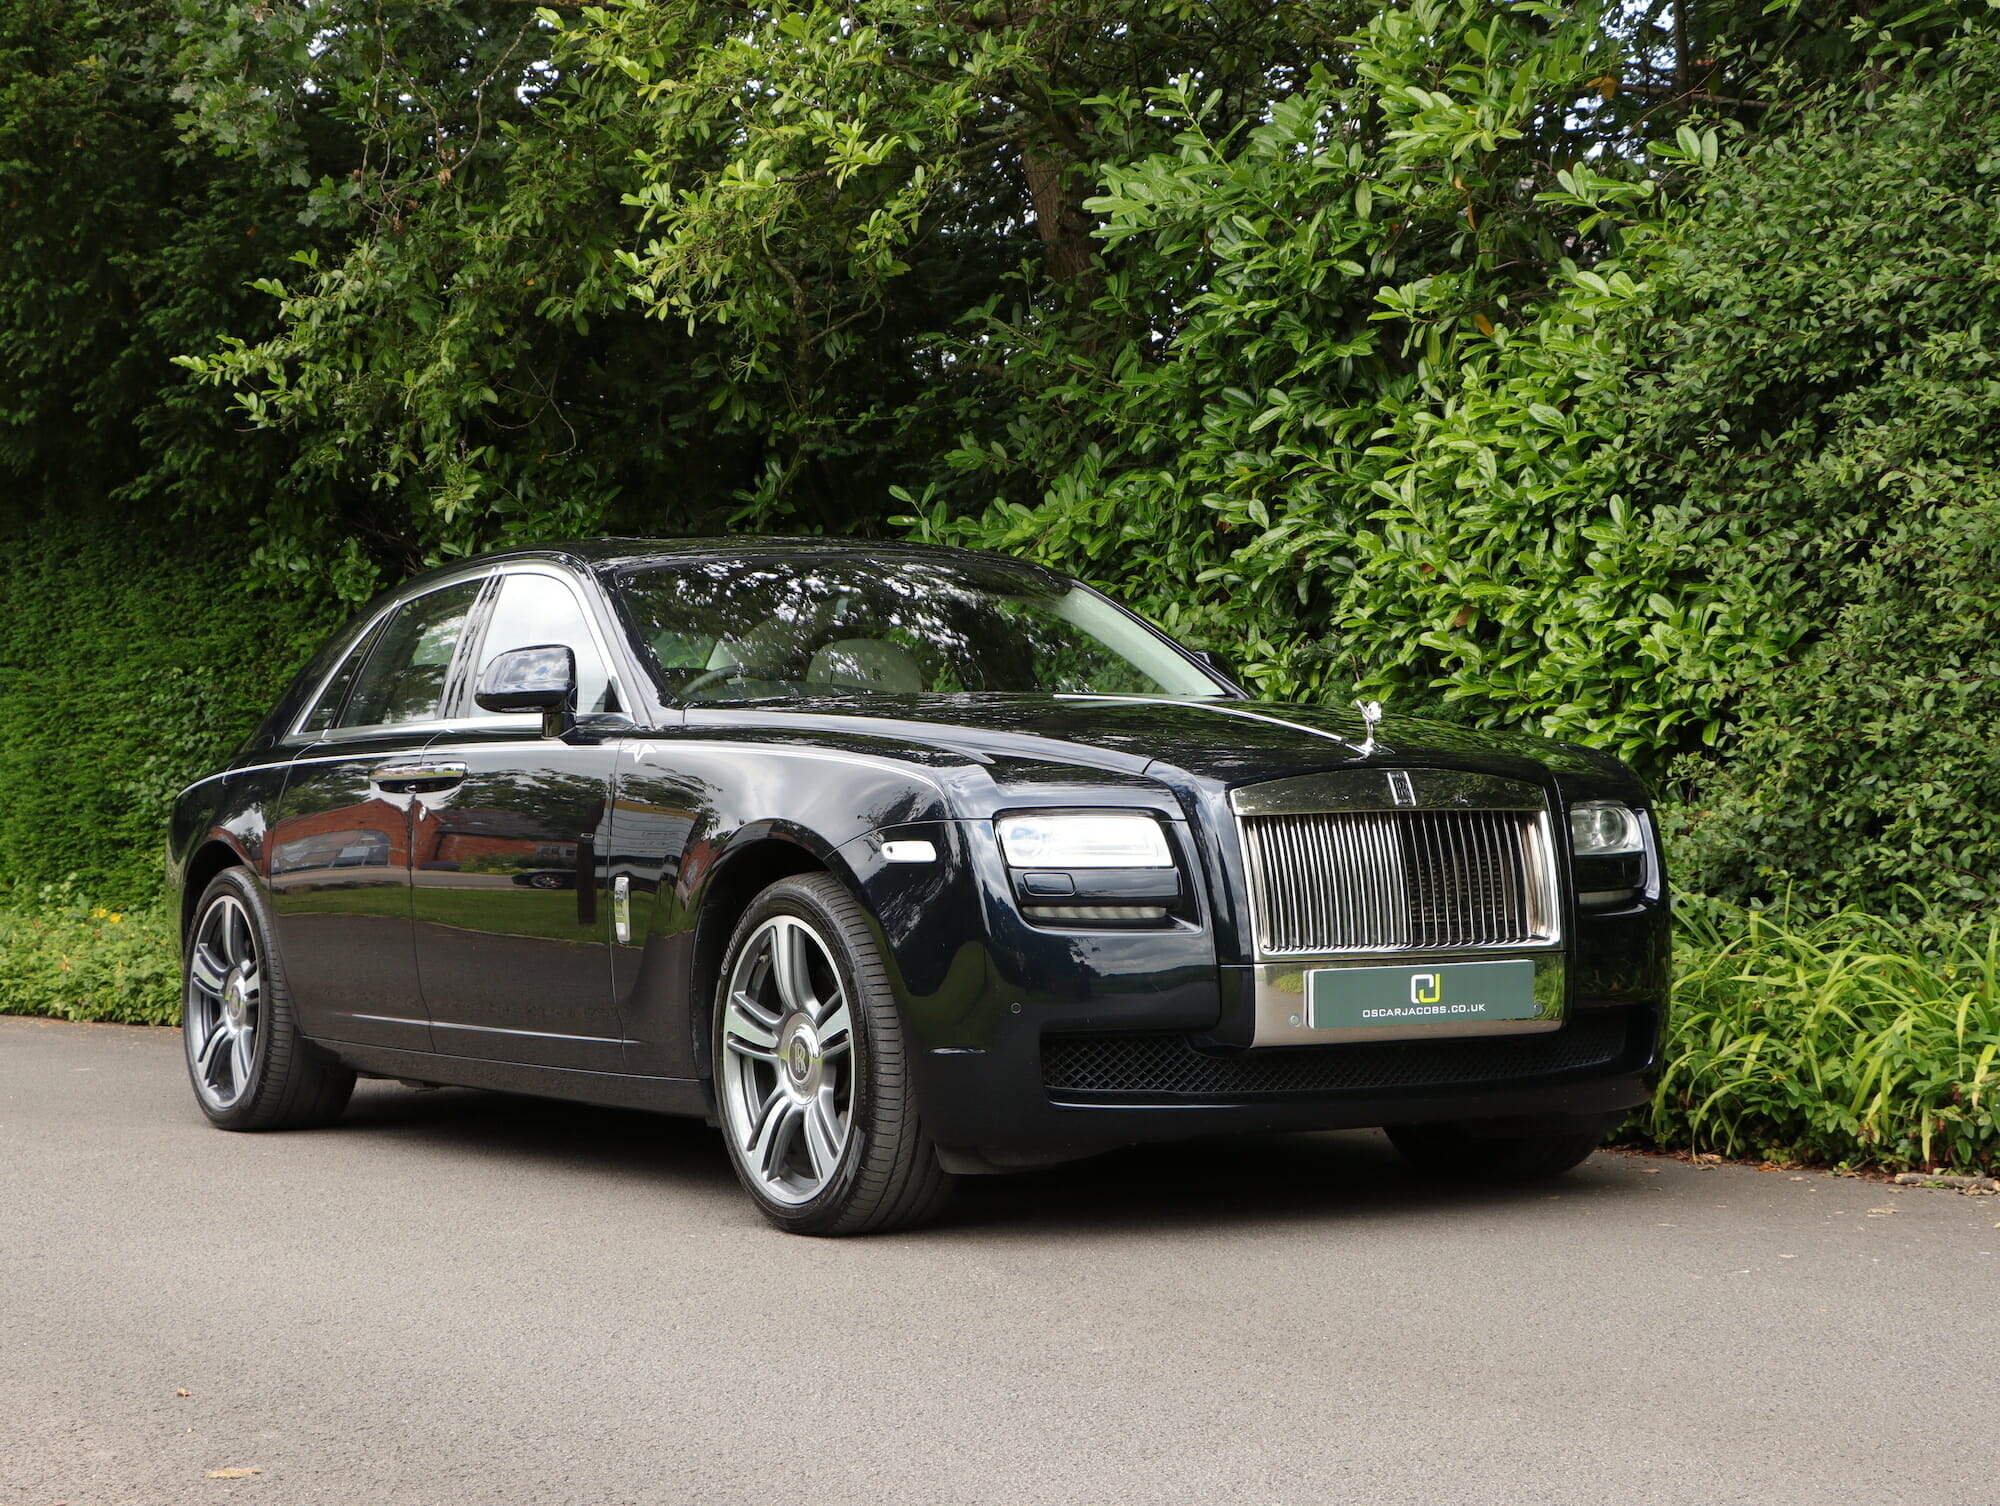 Used Rolls Royce Ghost in UK for sale 53  AutoUncle